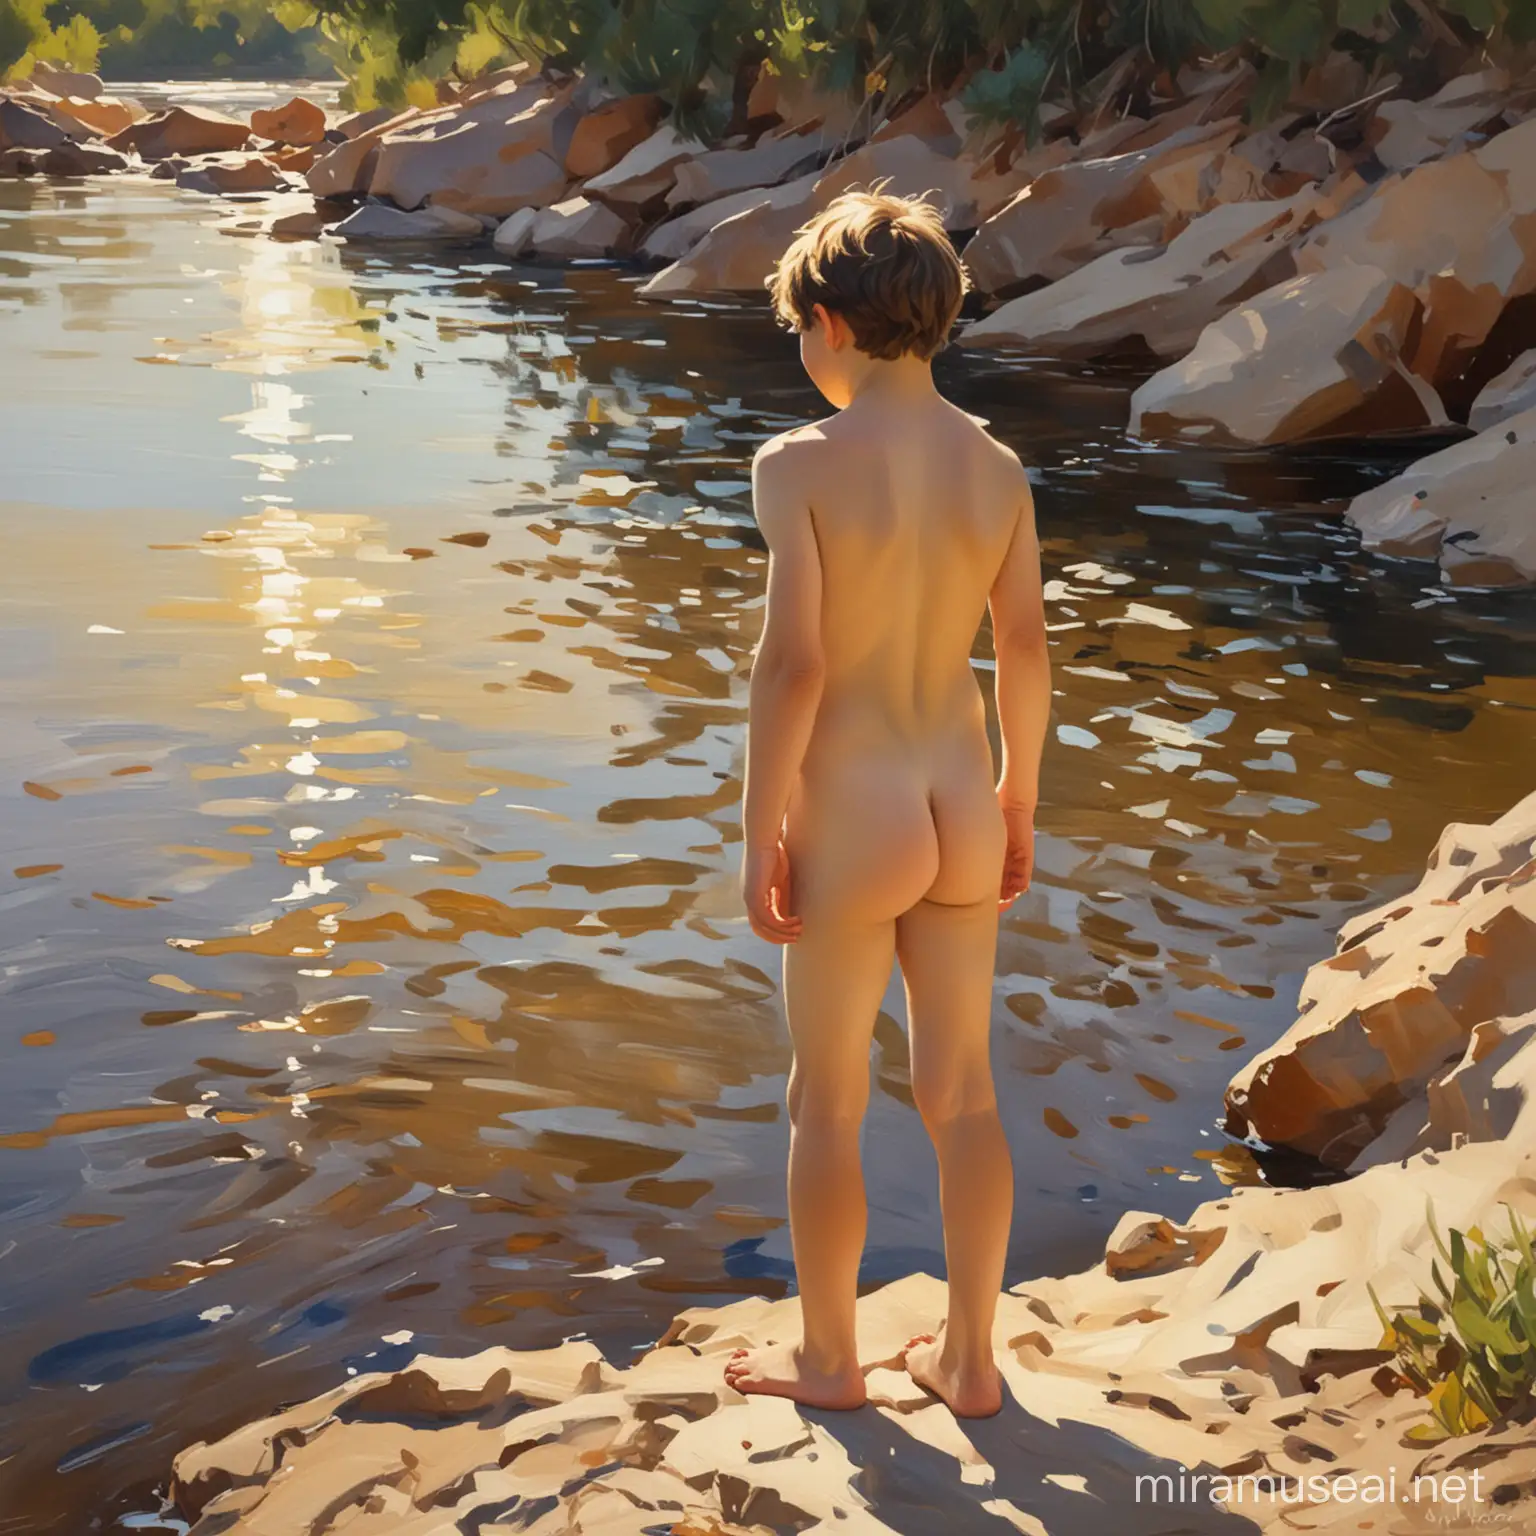 SorollaInspired Painting Naked Boy by the River in Contralight Illumination